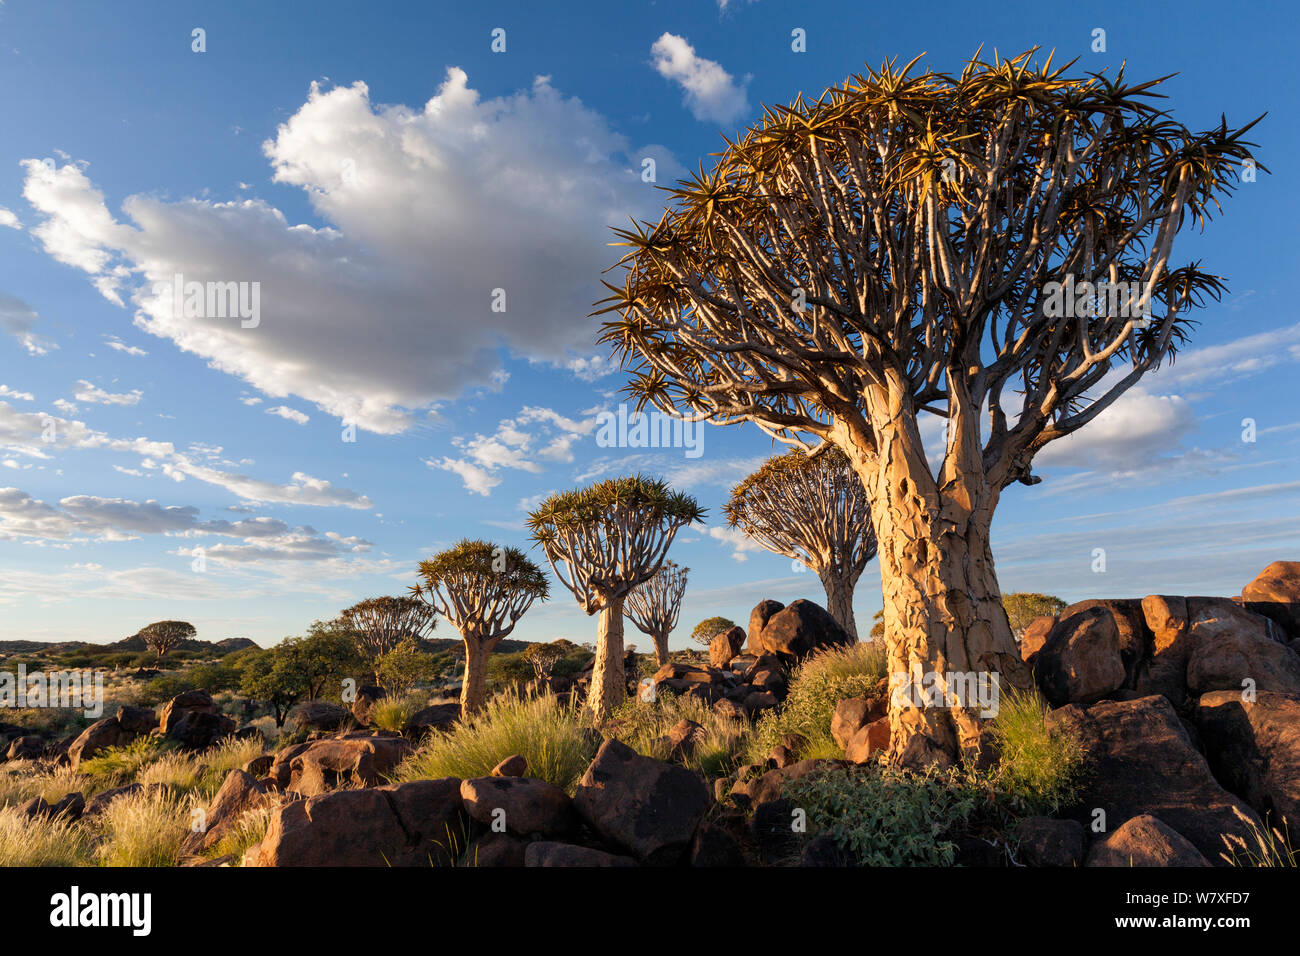 Quiver trees below a cloudy summer sky. Quiver Tree Forest, Keetmanshoop, Namibia. March 212. Non-ex. Stock Photo